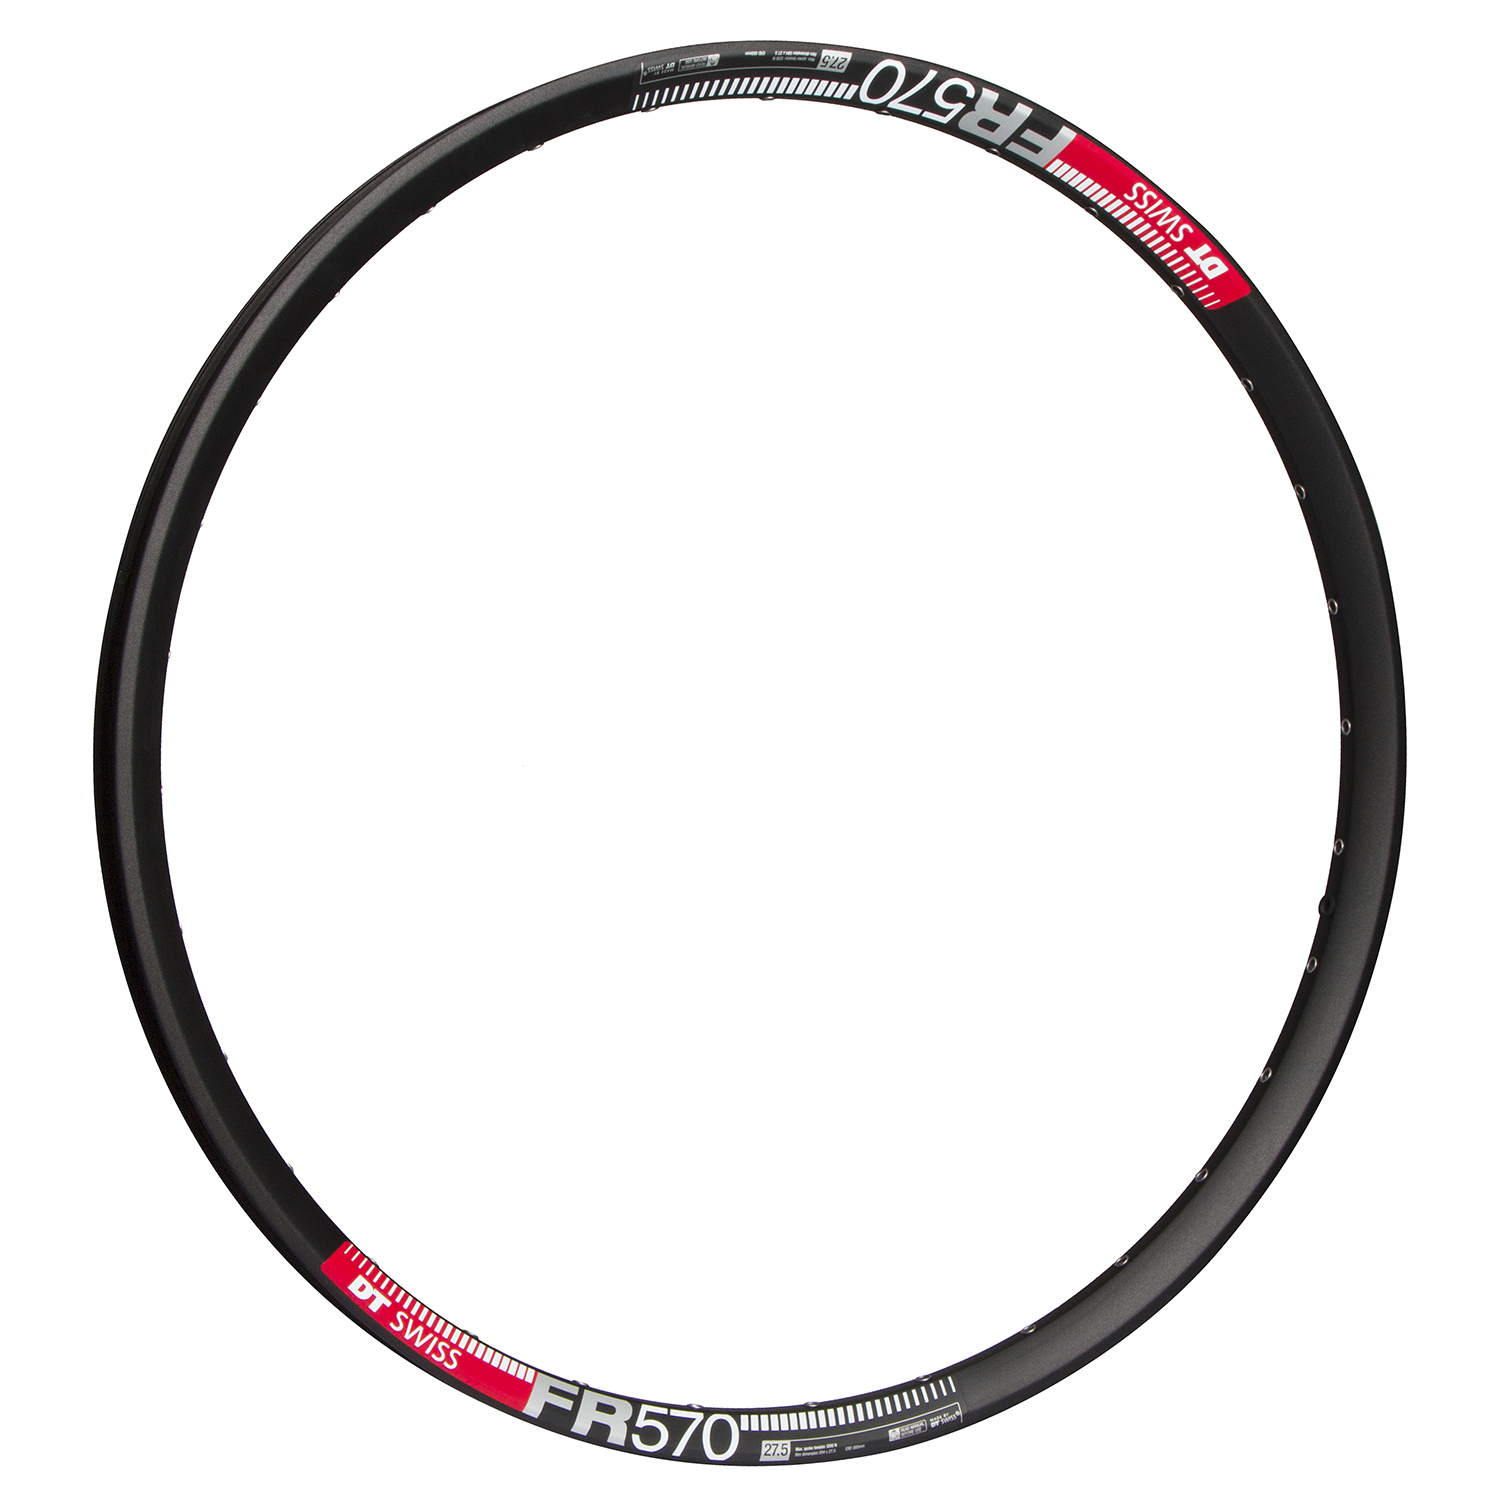 DT Swiss Jante MTB FR 570 Black, 27.5 Inches, Tubeless Ready